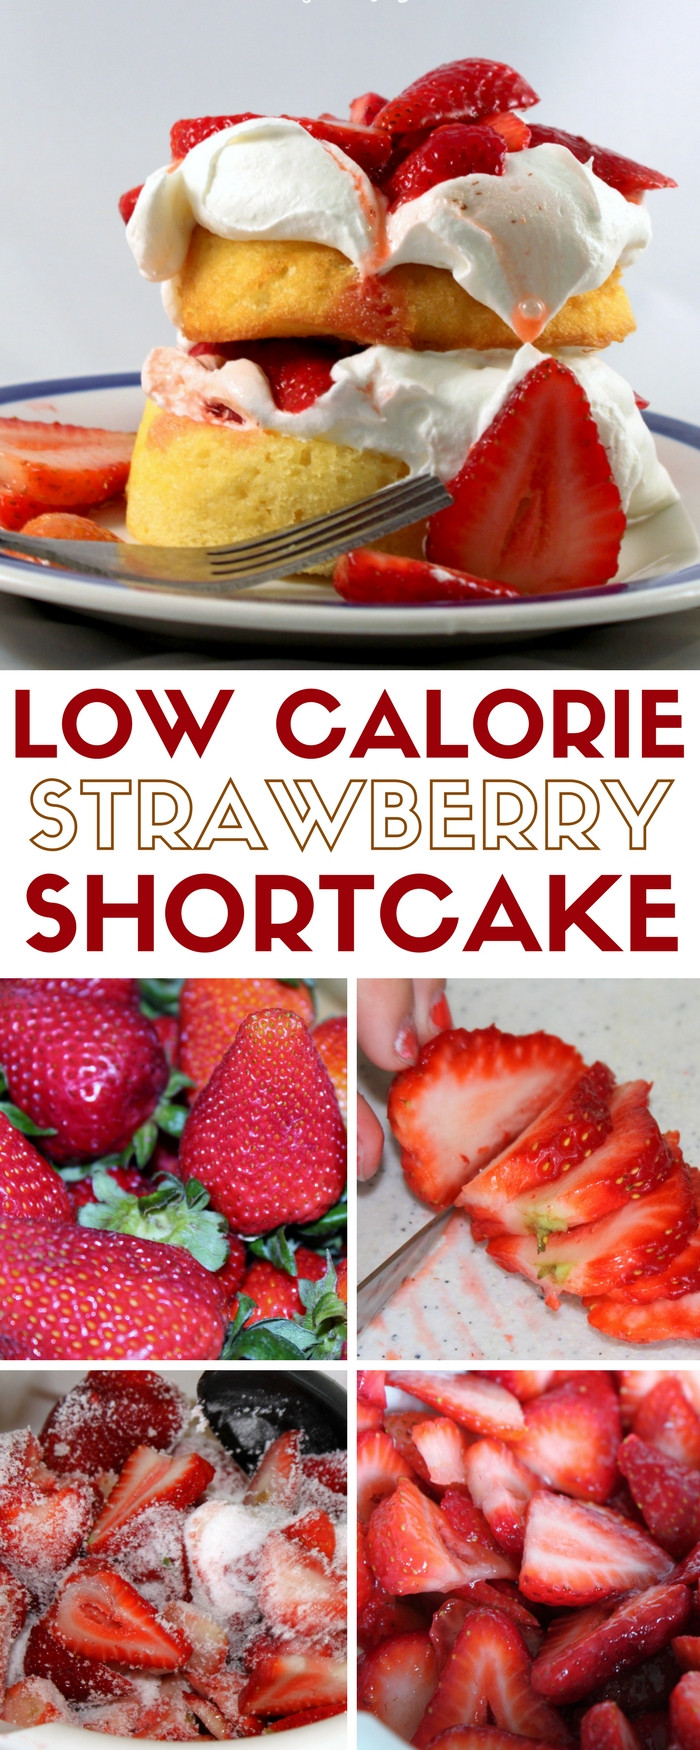 Low Calorie Strawberry Shortcake
 How to Make Low Calorie Strawberry Shortcake The Crafty